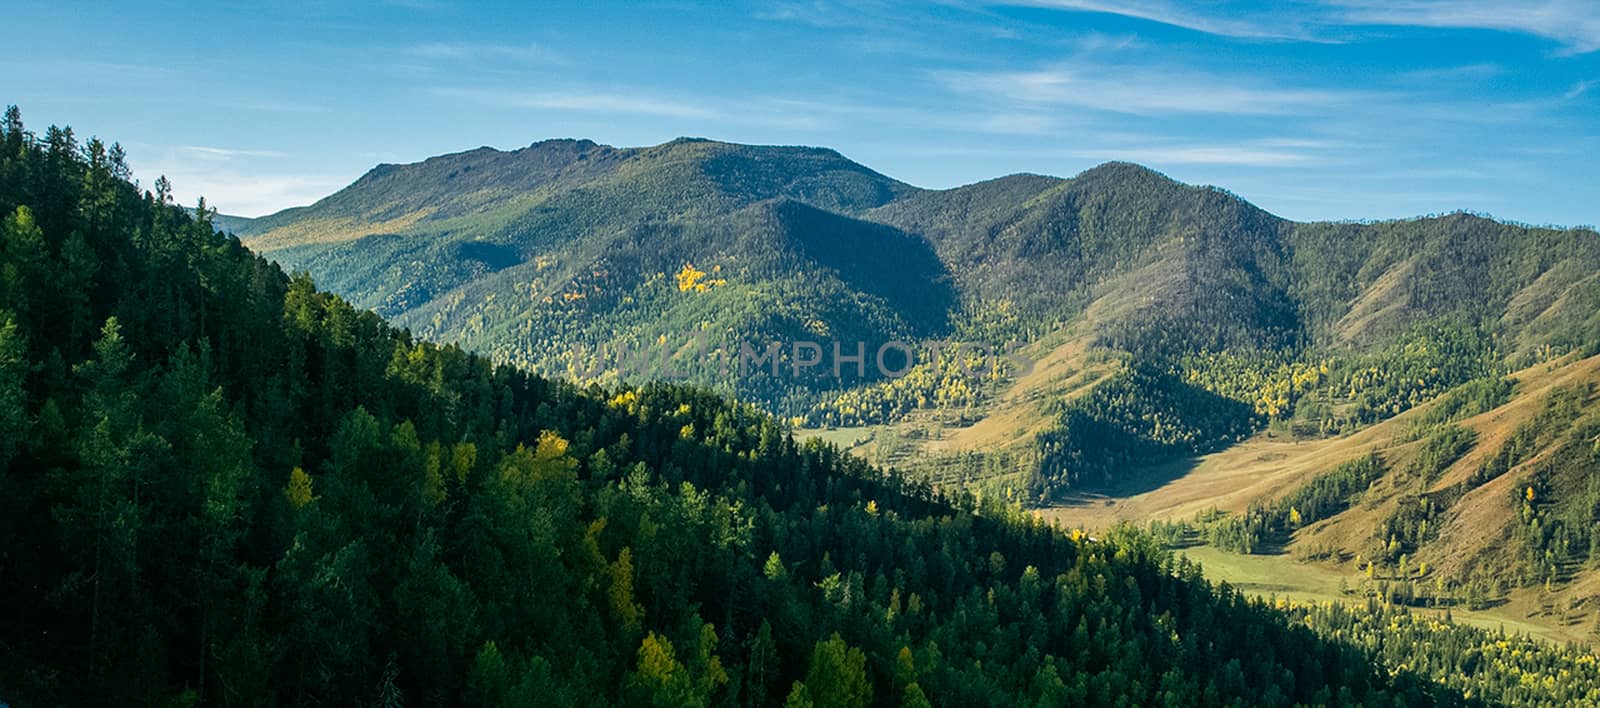 Mountains and hills altai in autumn, panoramic photo. by DePo